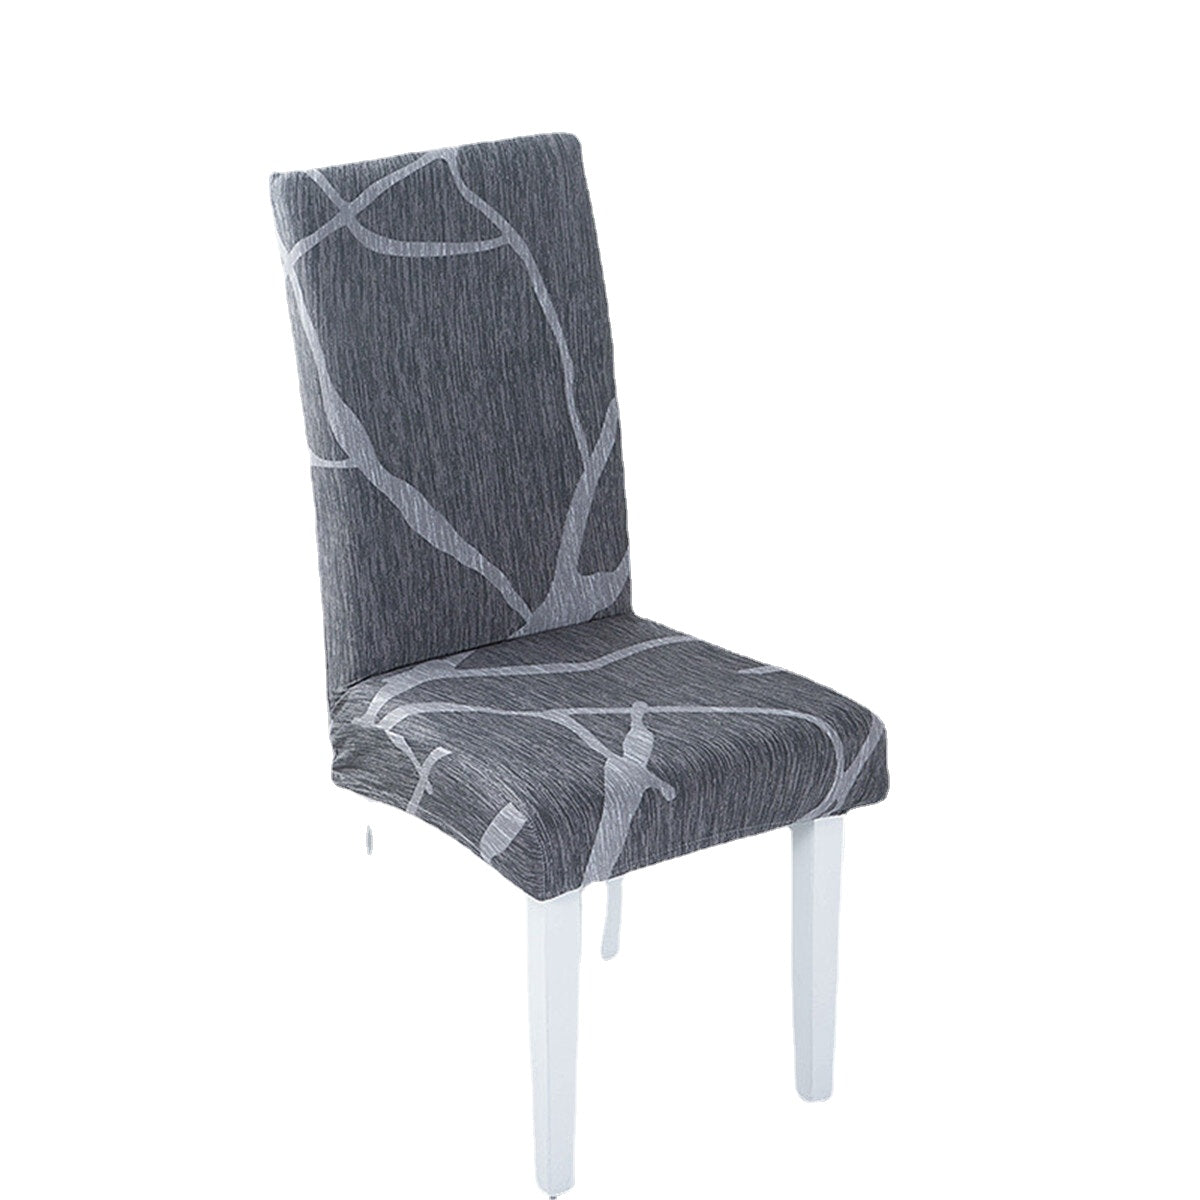 Elastic Dining Chair Cover Stretch Polyester Chair Seat Slipcover Office Computer Chair Protector Home Office Furniture Decor